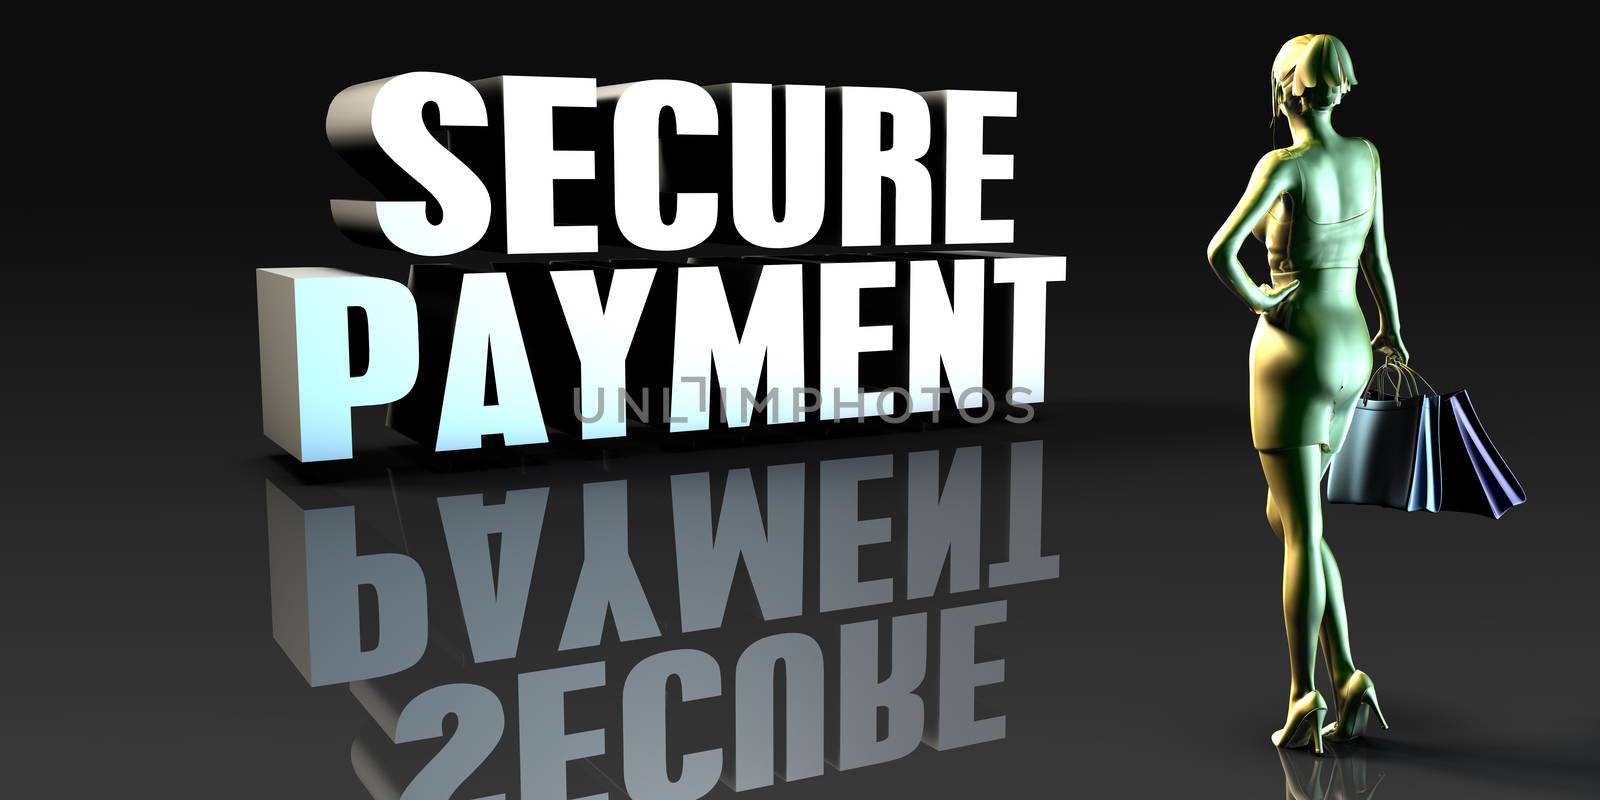 Secure Payment by kentoh